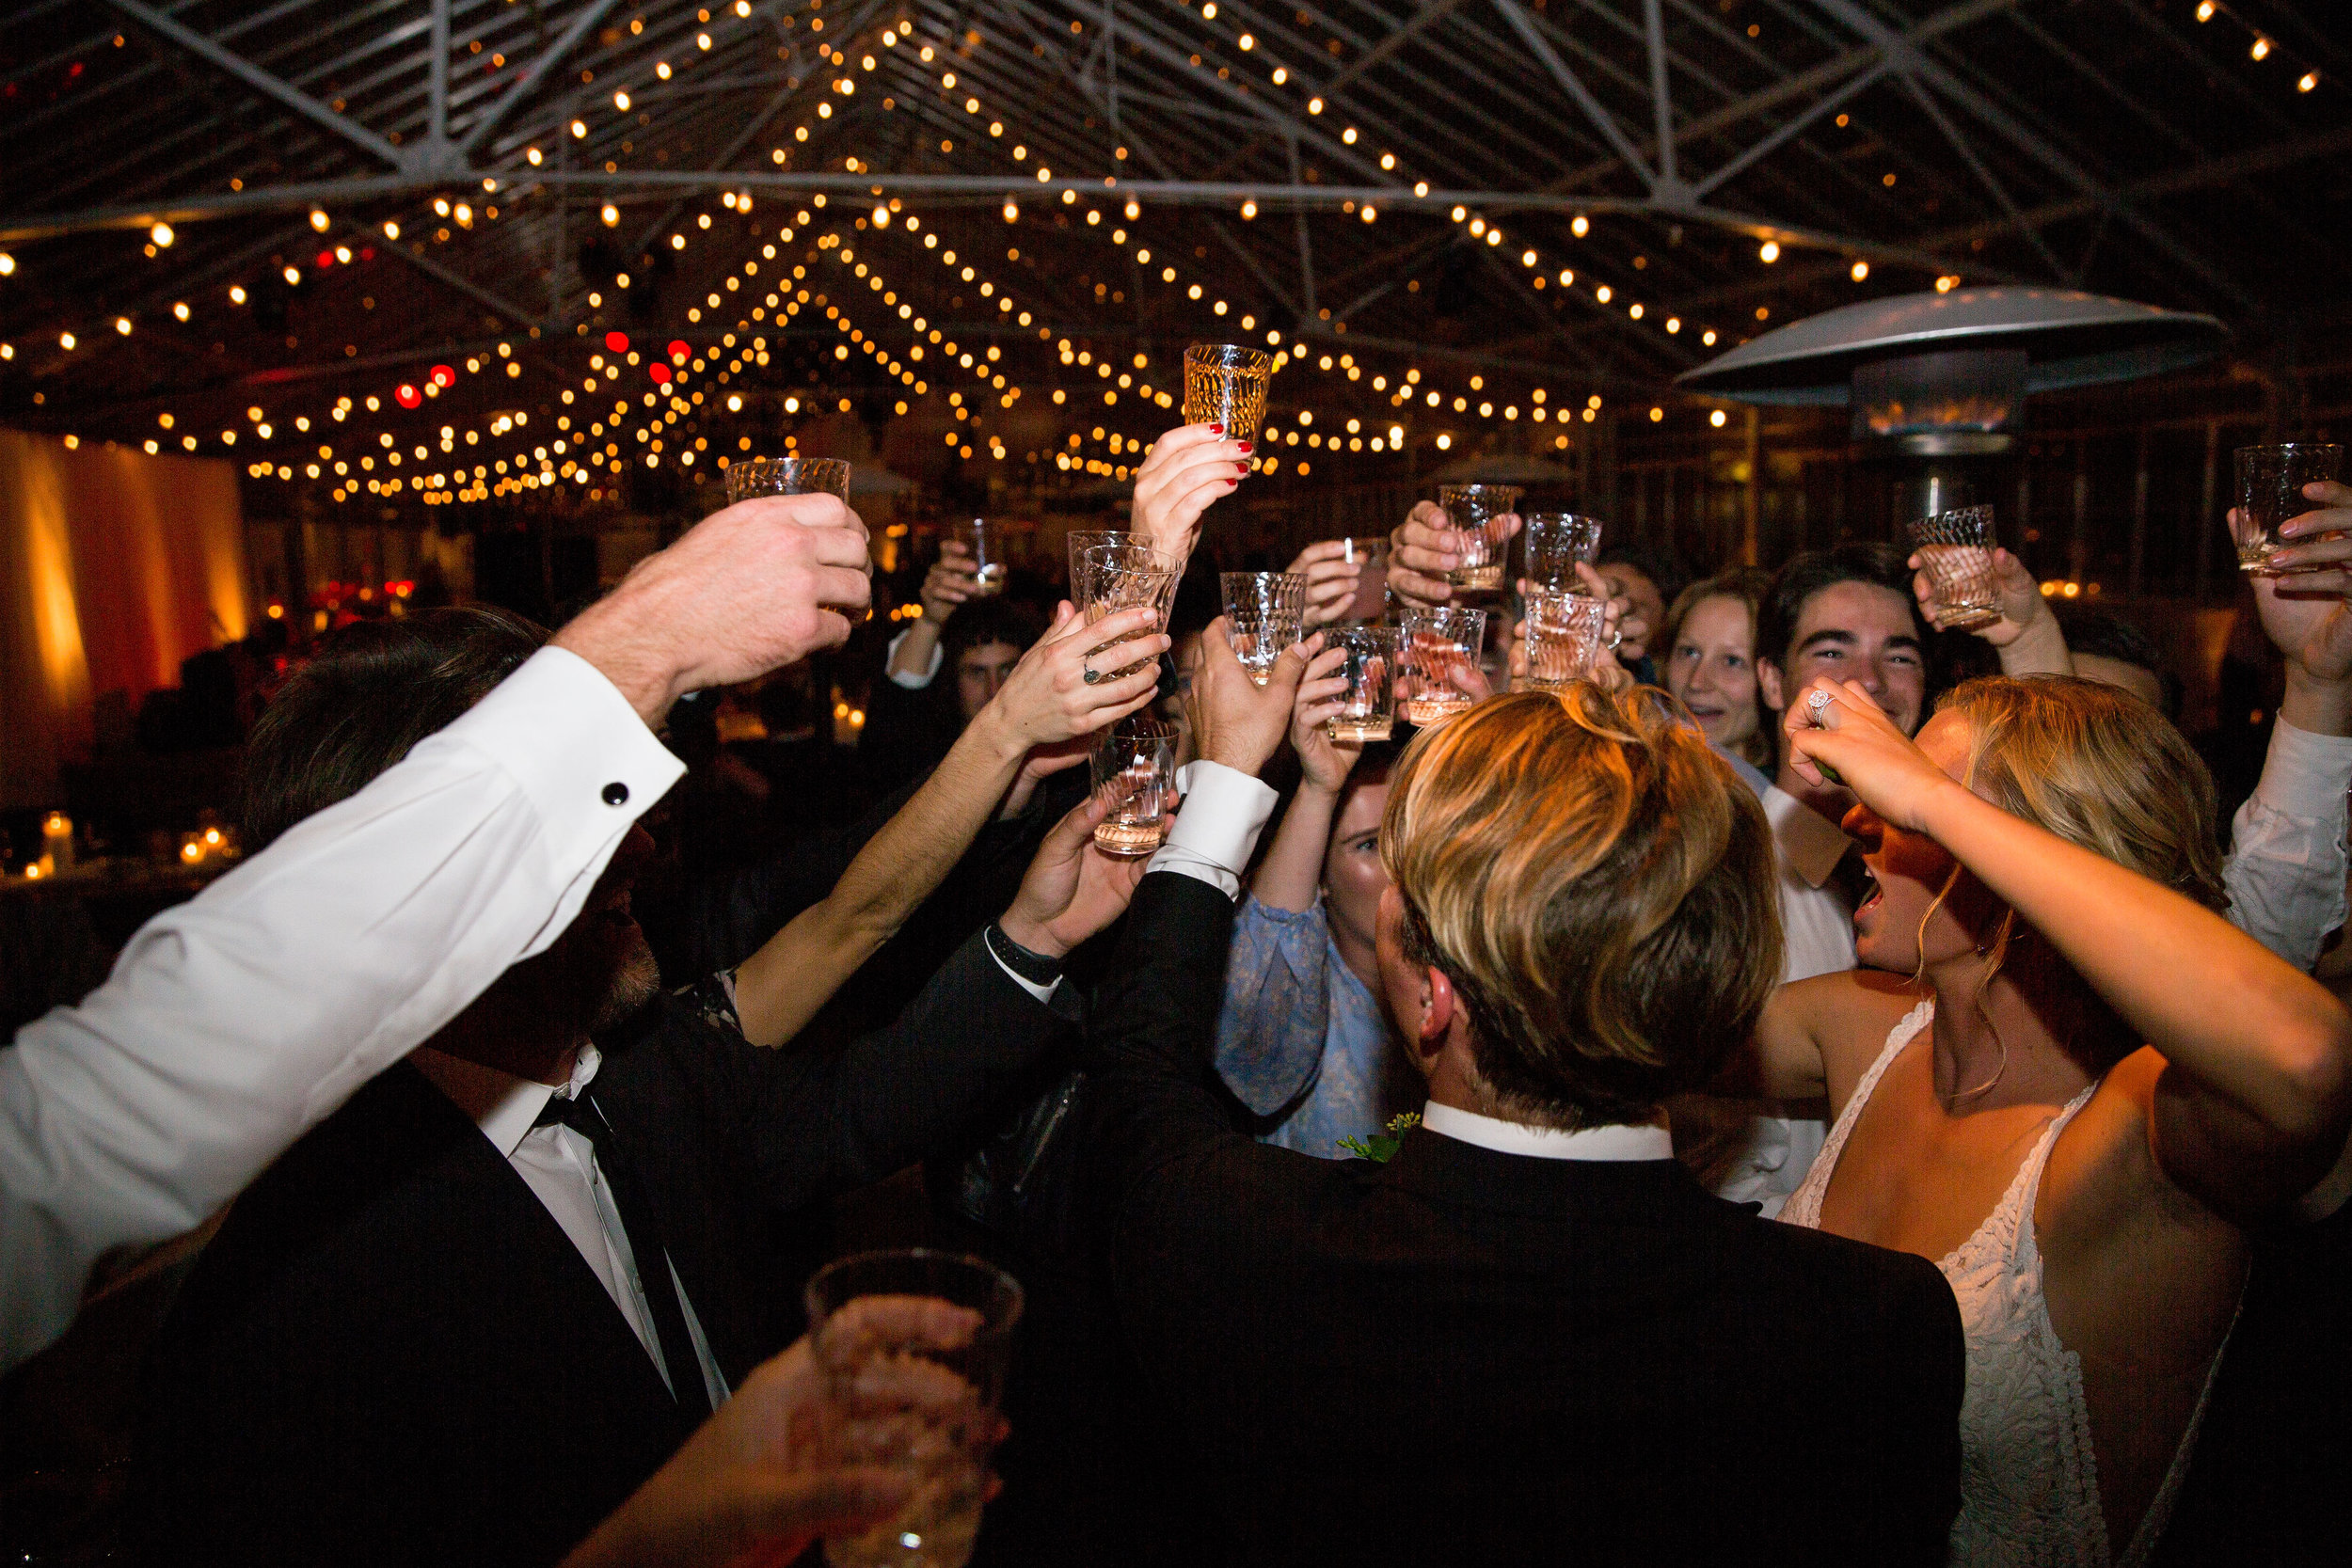 20190202_Tequila toast_Allan Wedding__Jill and Co_Kevin Voegtlin Photography.jpg